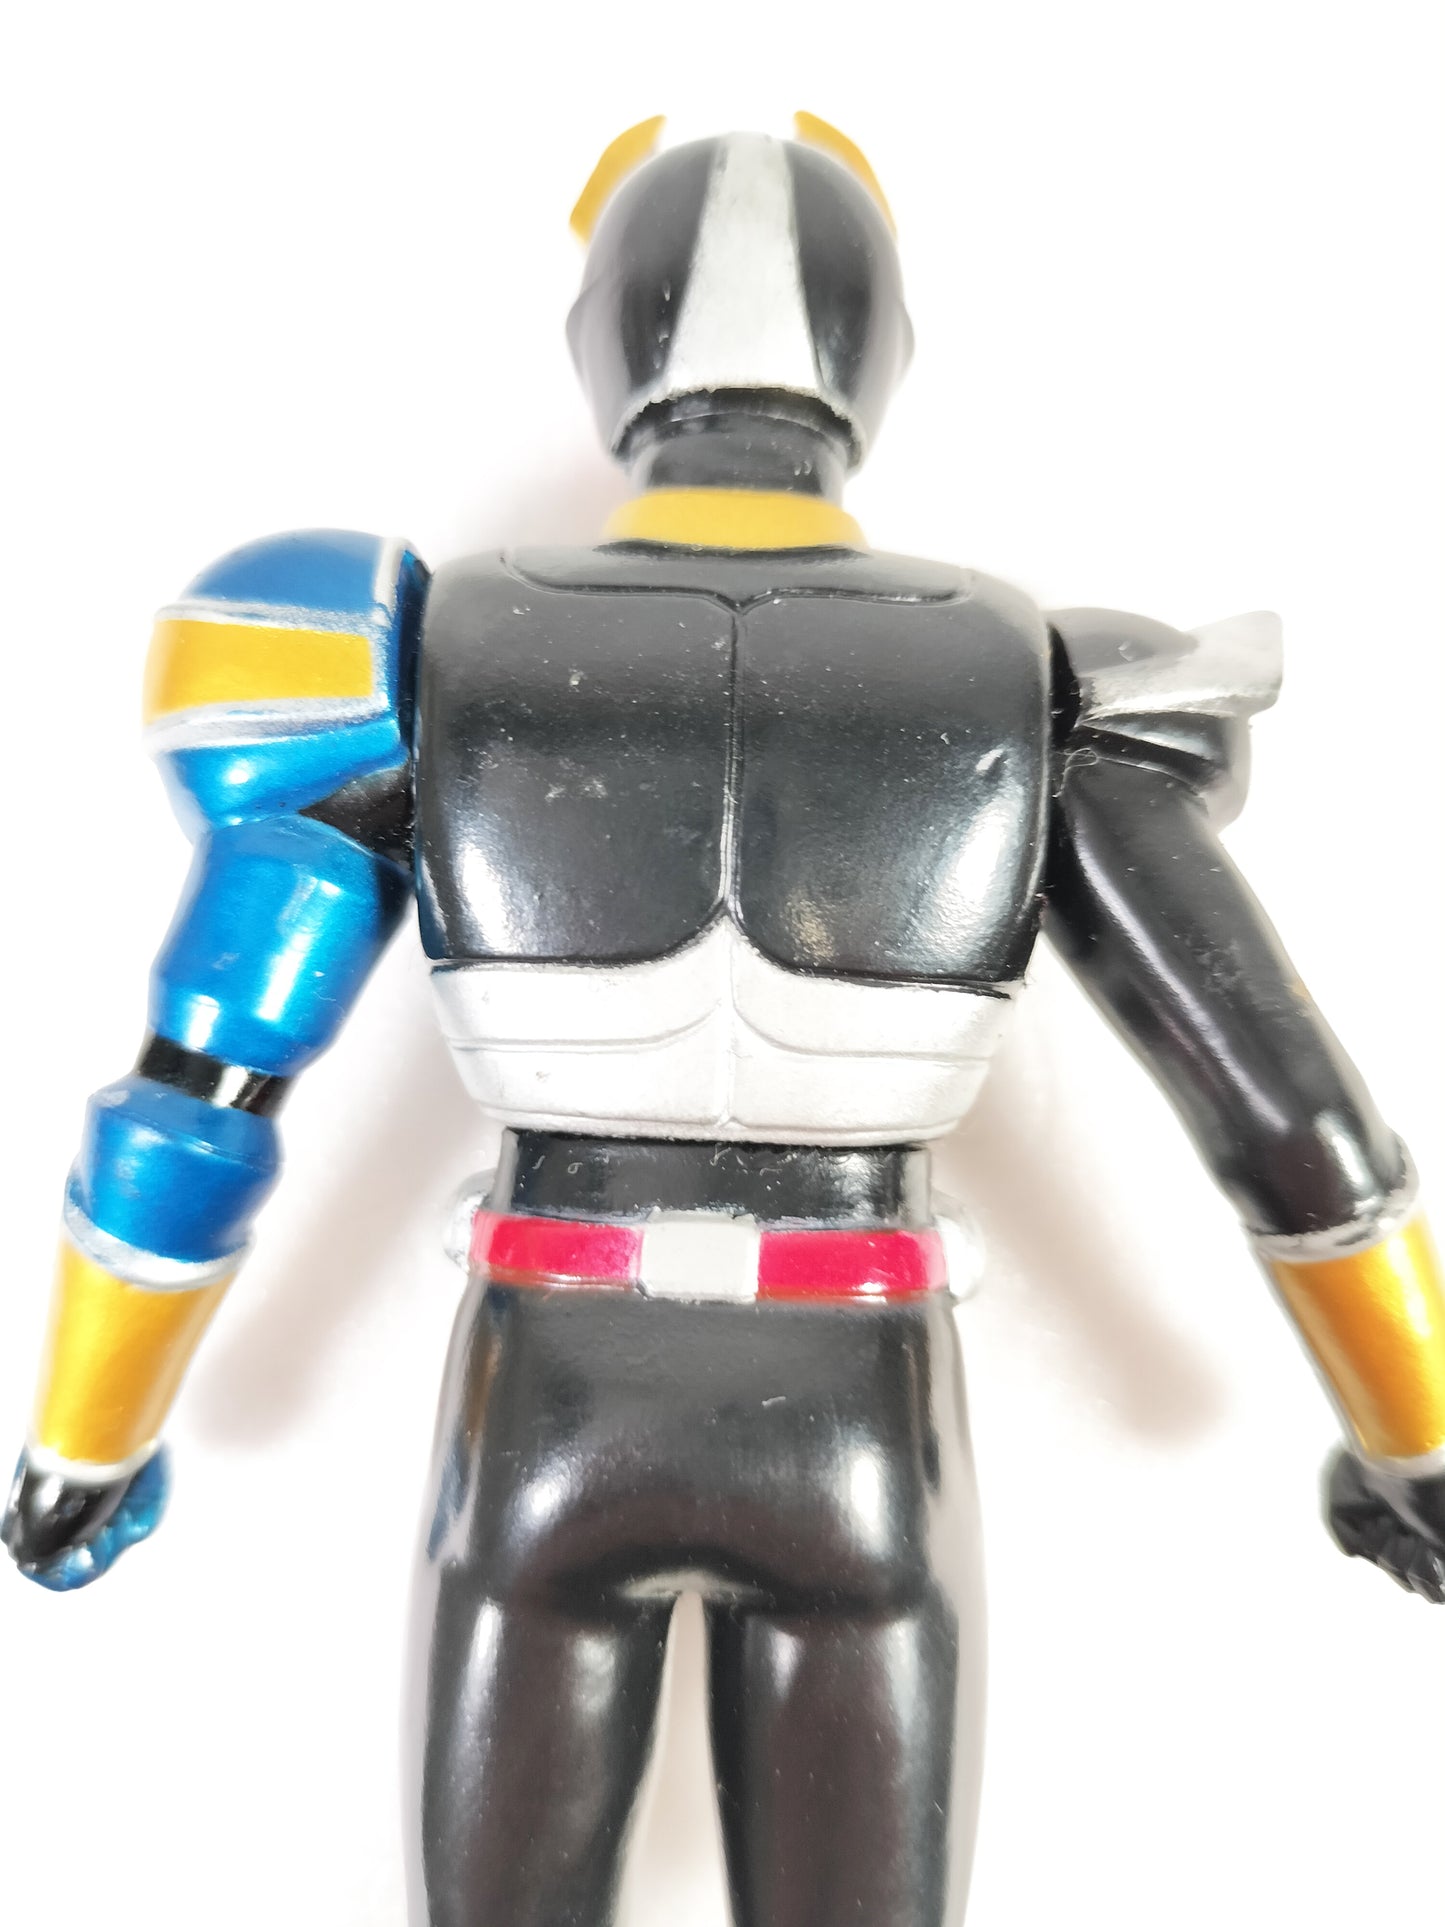 Kamen Rider Agito (Storm Form) Mask Rider Made in China Height about 13cm Manufactured in 2001 Sofvi Figure retro vintage major scratches and dirt